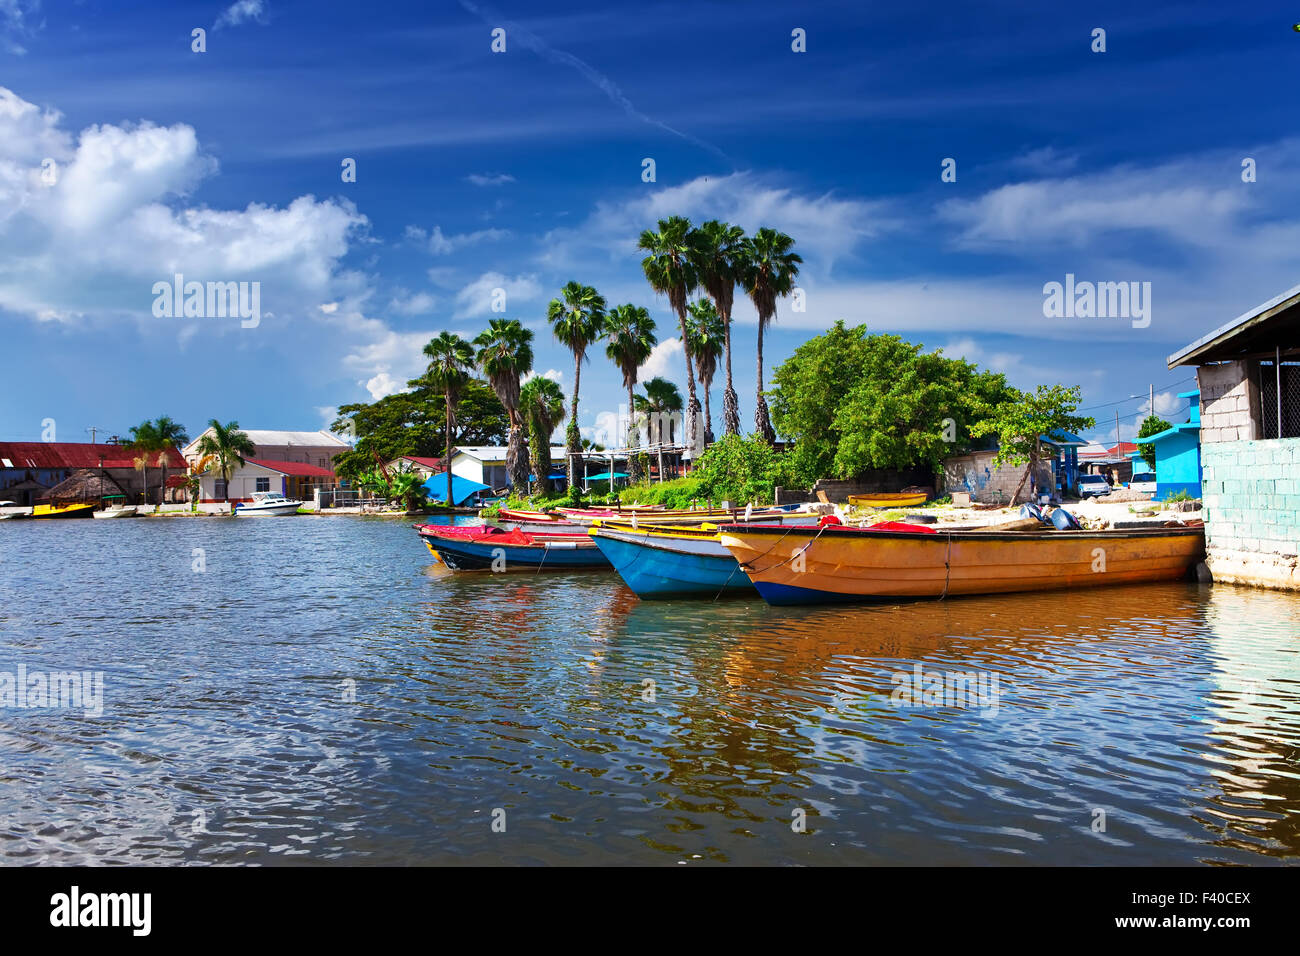 Jamaica. National boats on the Black river. Stock Photo